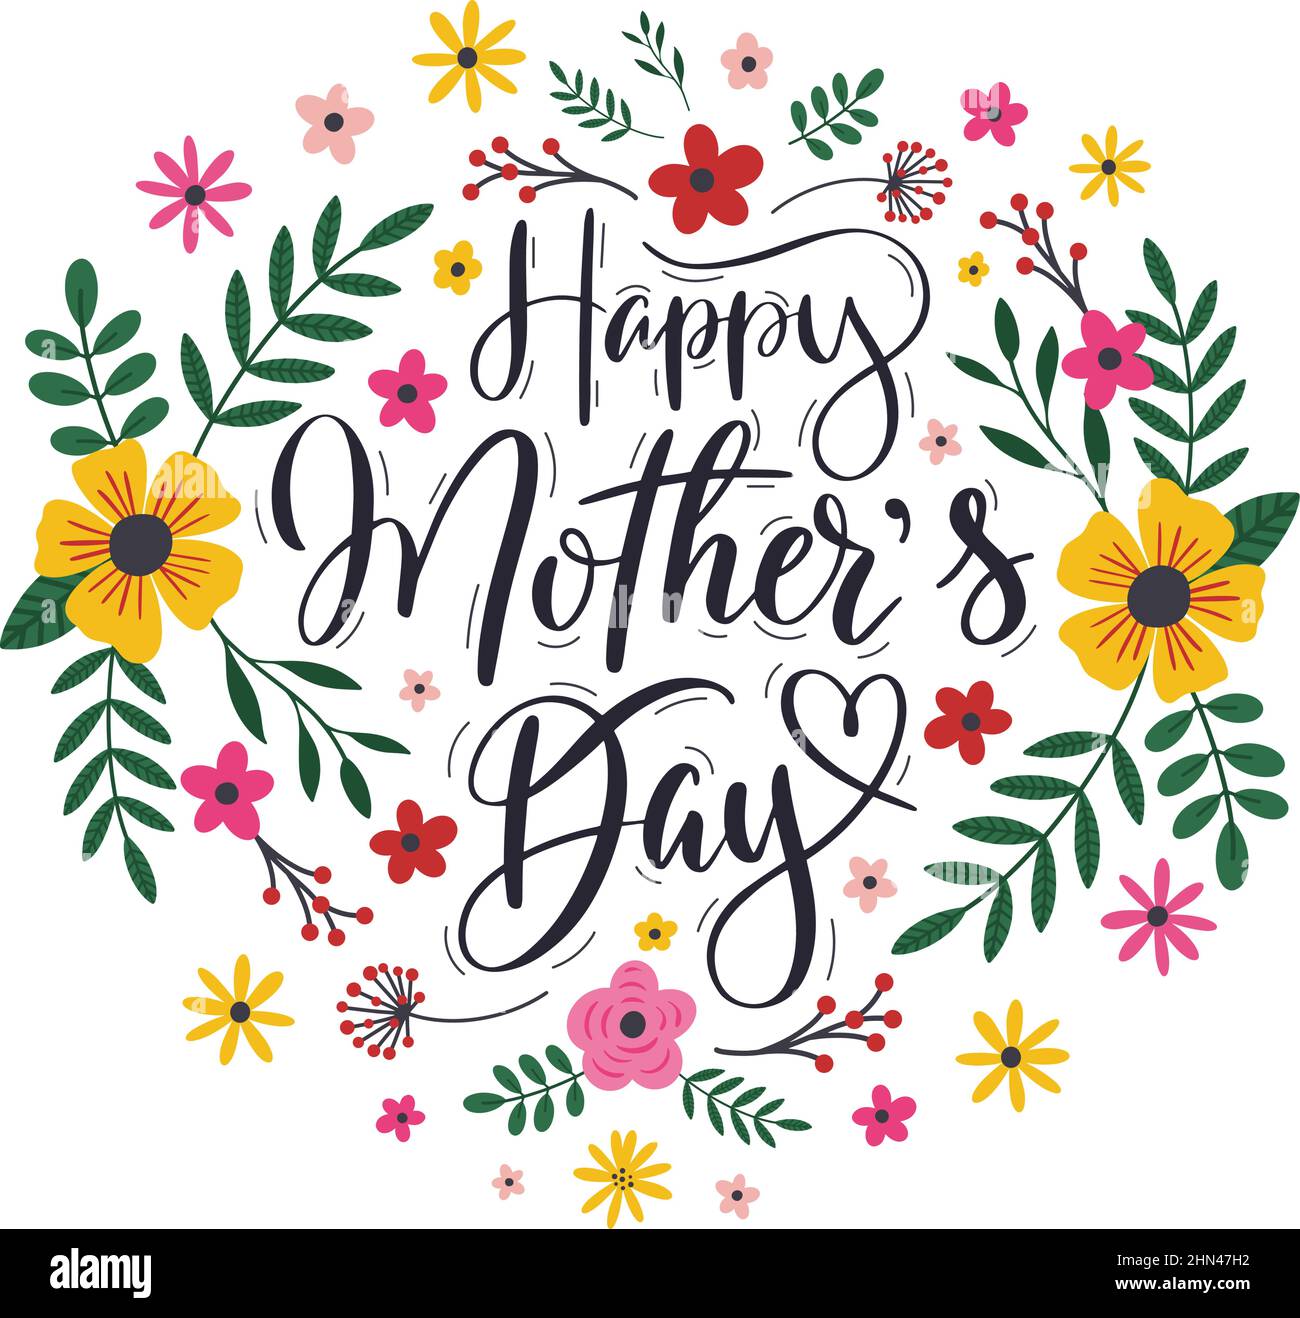 Happy Mothers Day Greeting Text Vector Design Mothers Day Greeting  Typography In Black Elegant Stock Illustration - Download Image Now - iStock